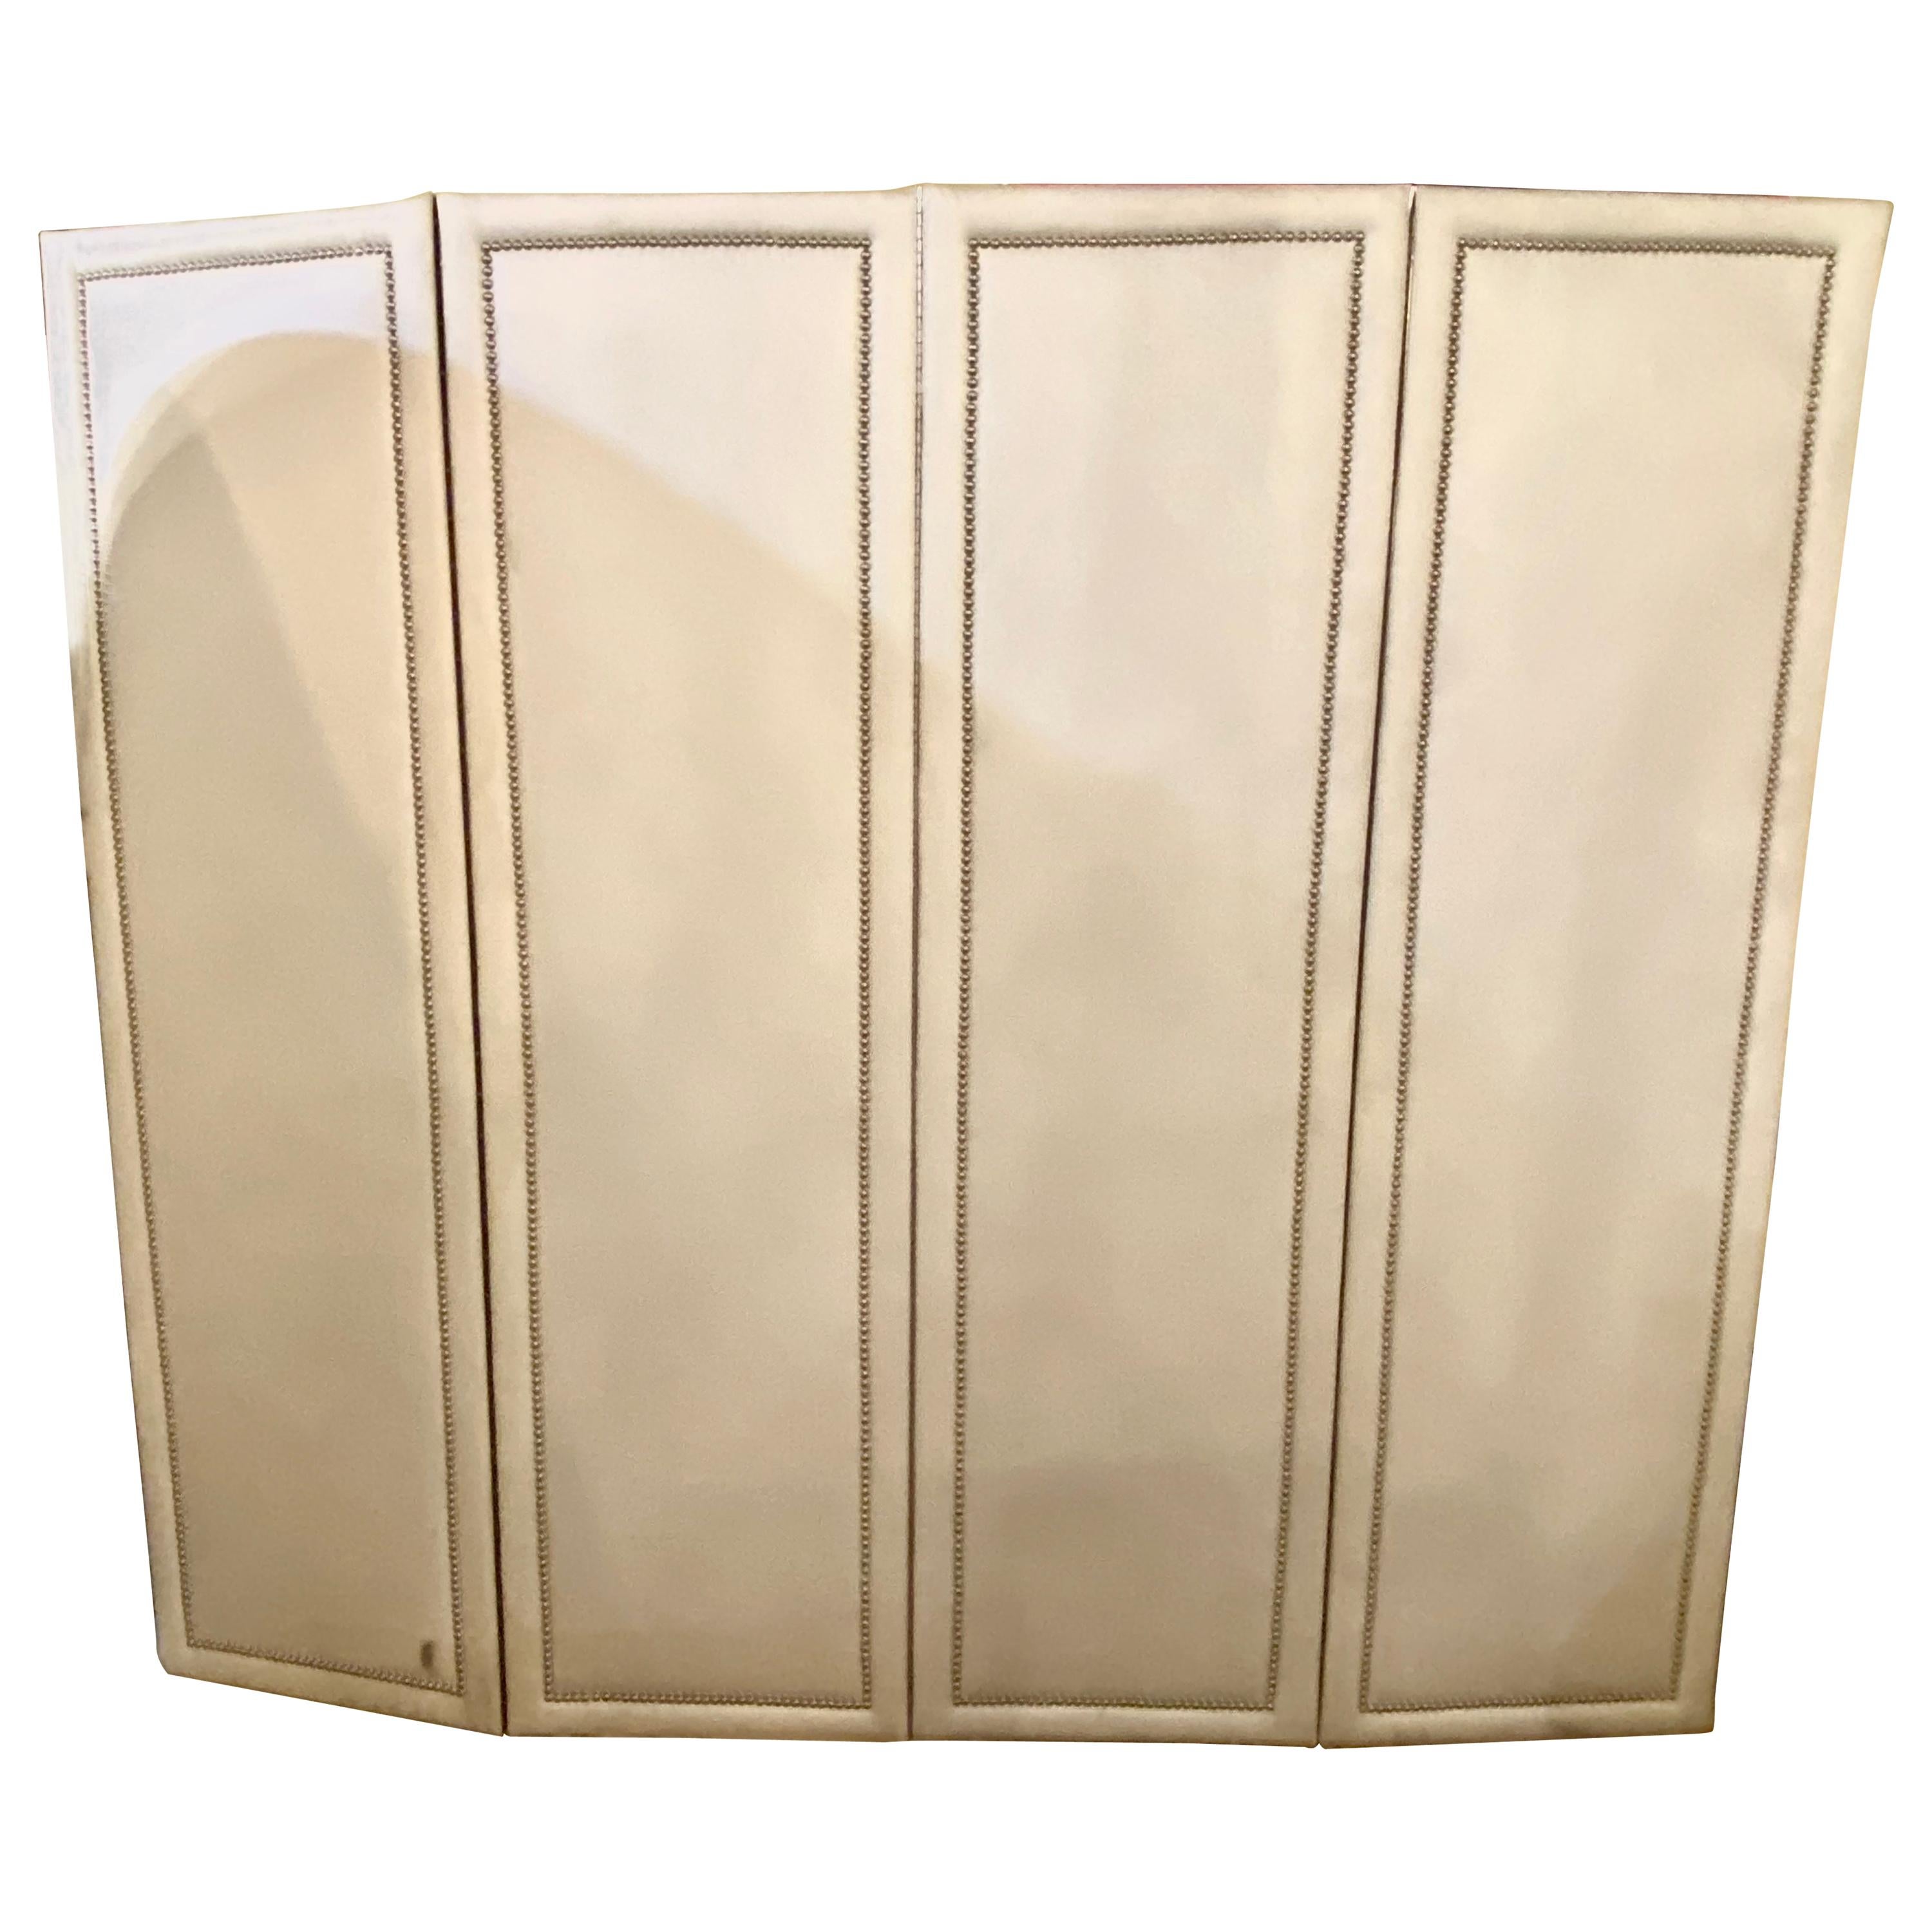 Four Panel White Linen Upholstered Screen or Room Divider with Piano Hinges